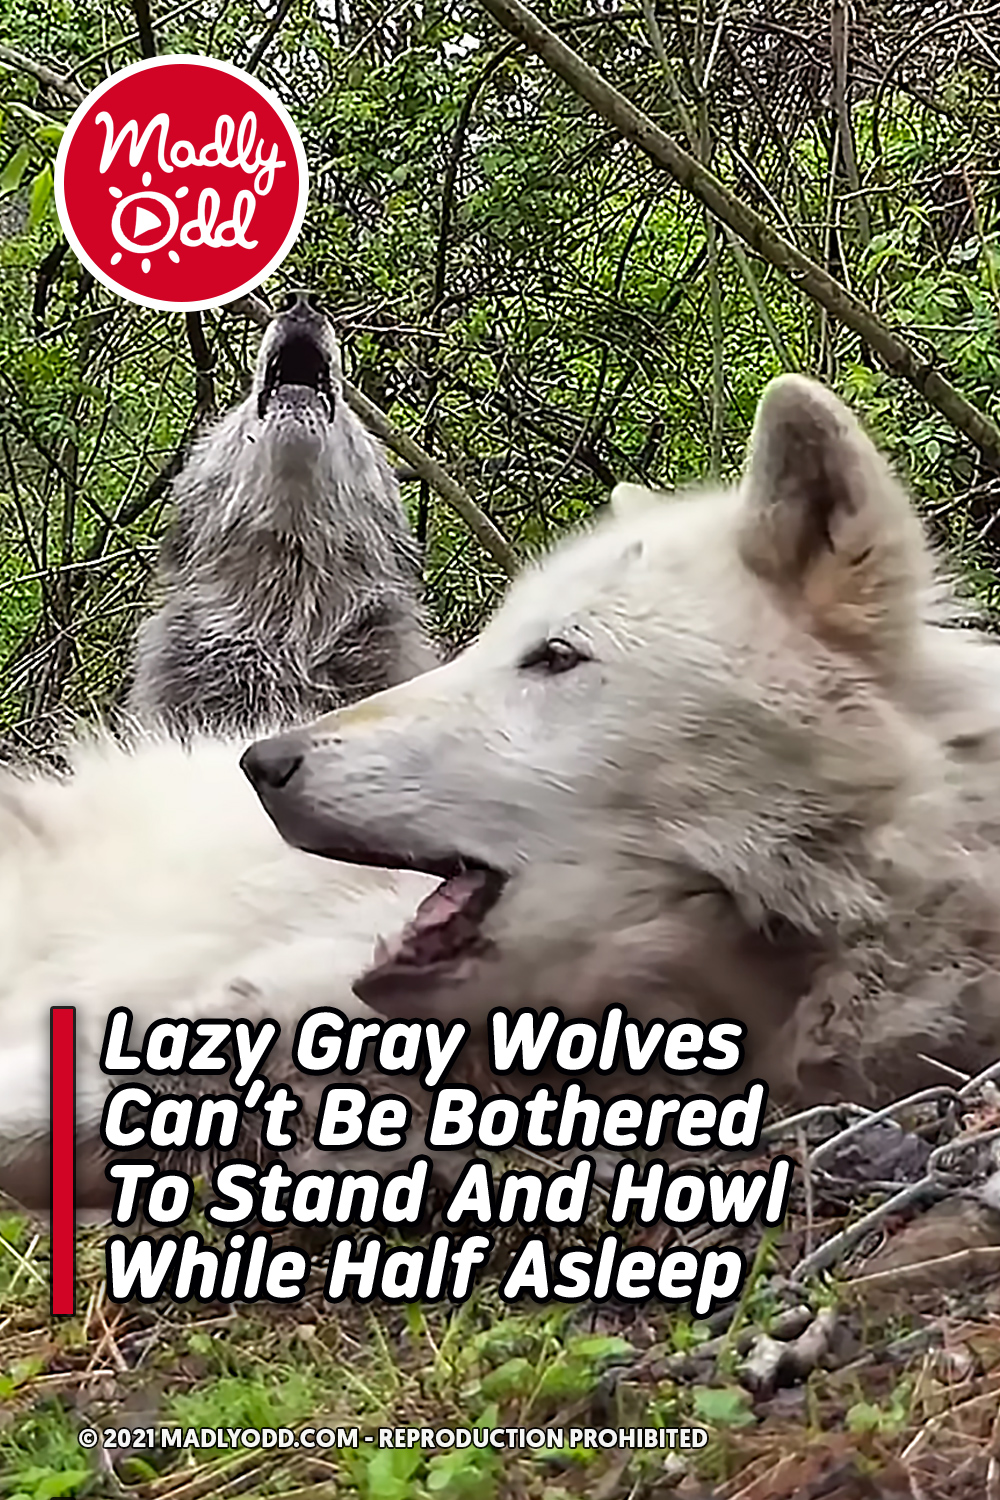 Lazy Gray Wolves Can’t Be Bothered To Stand And Howl While Half Asleep